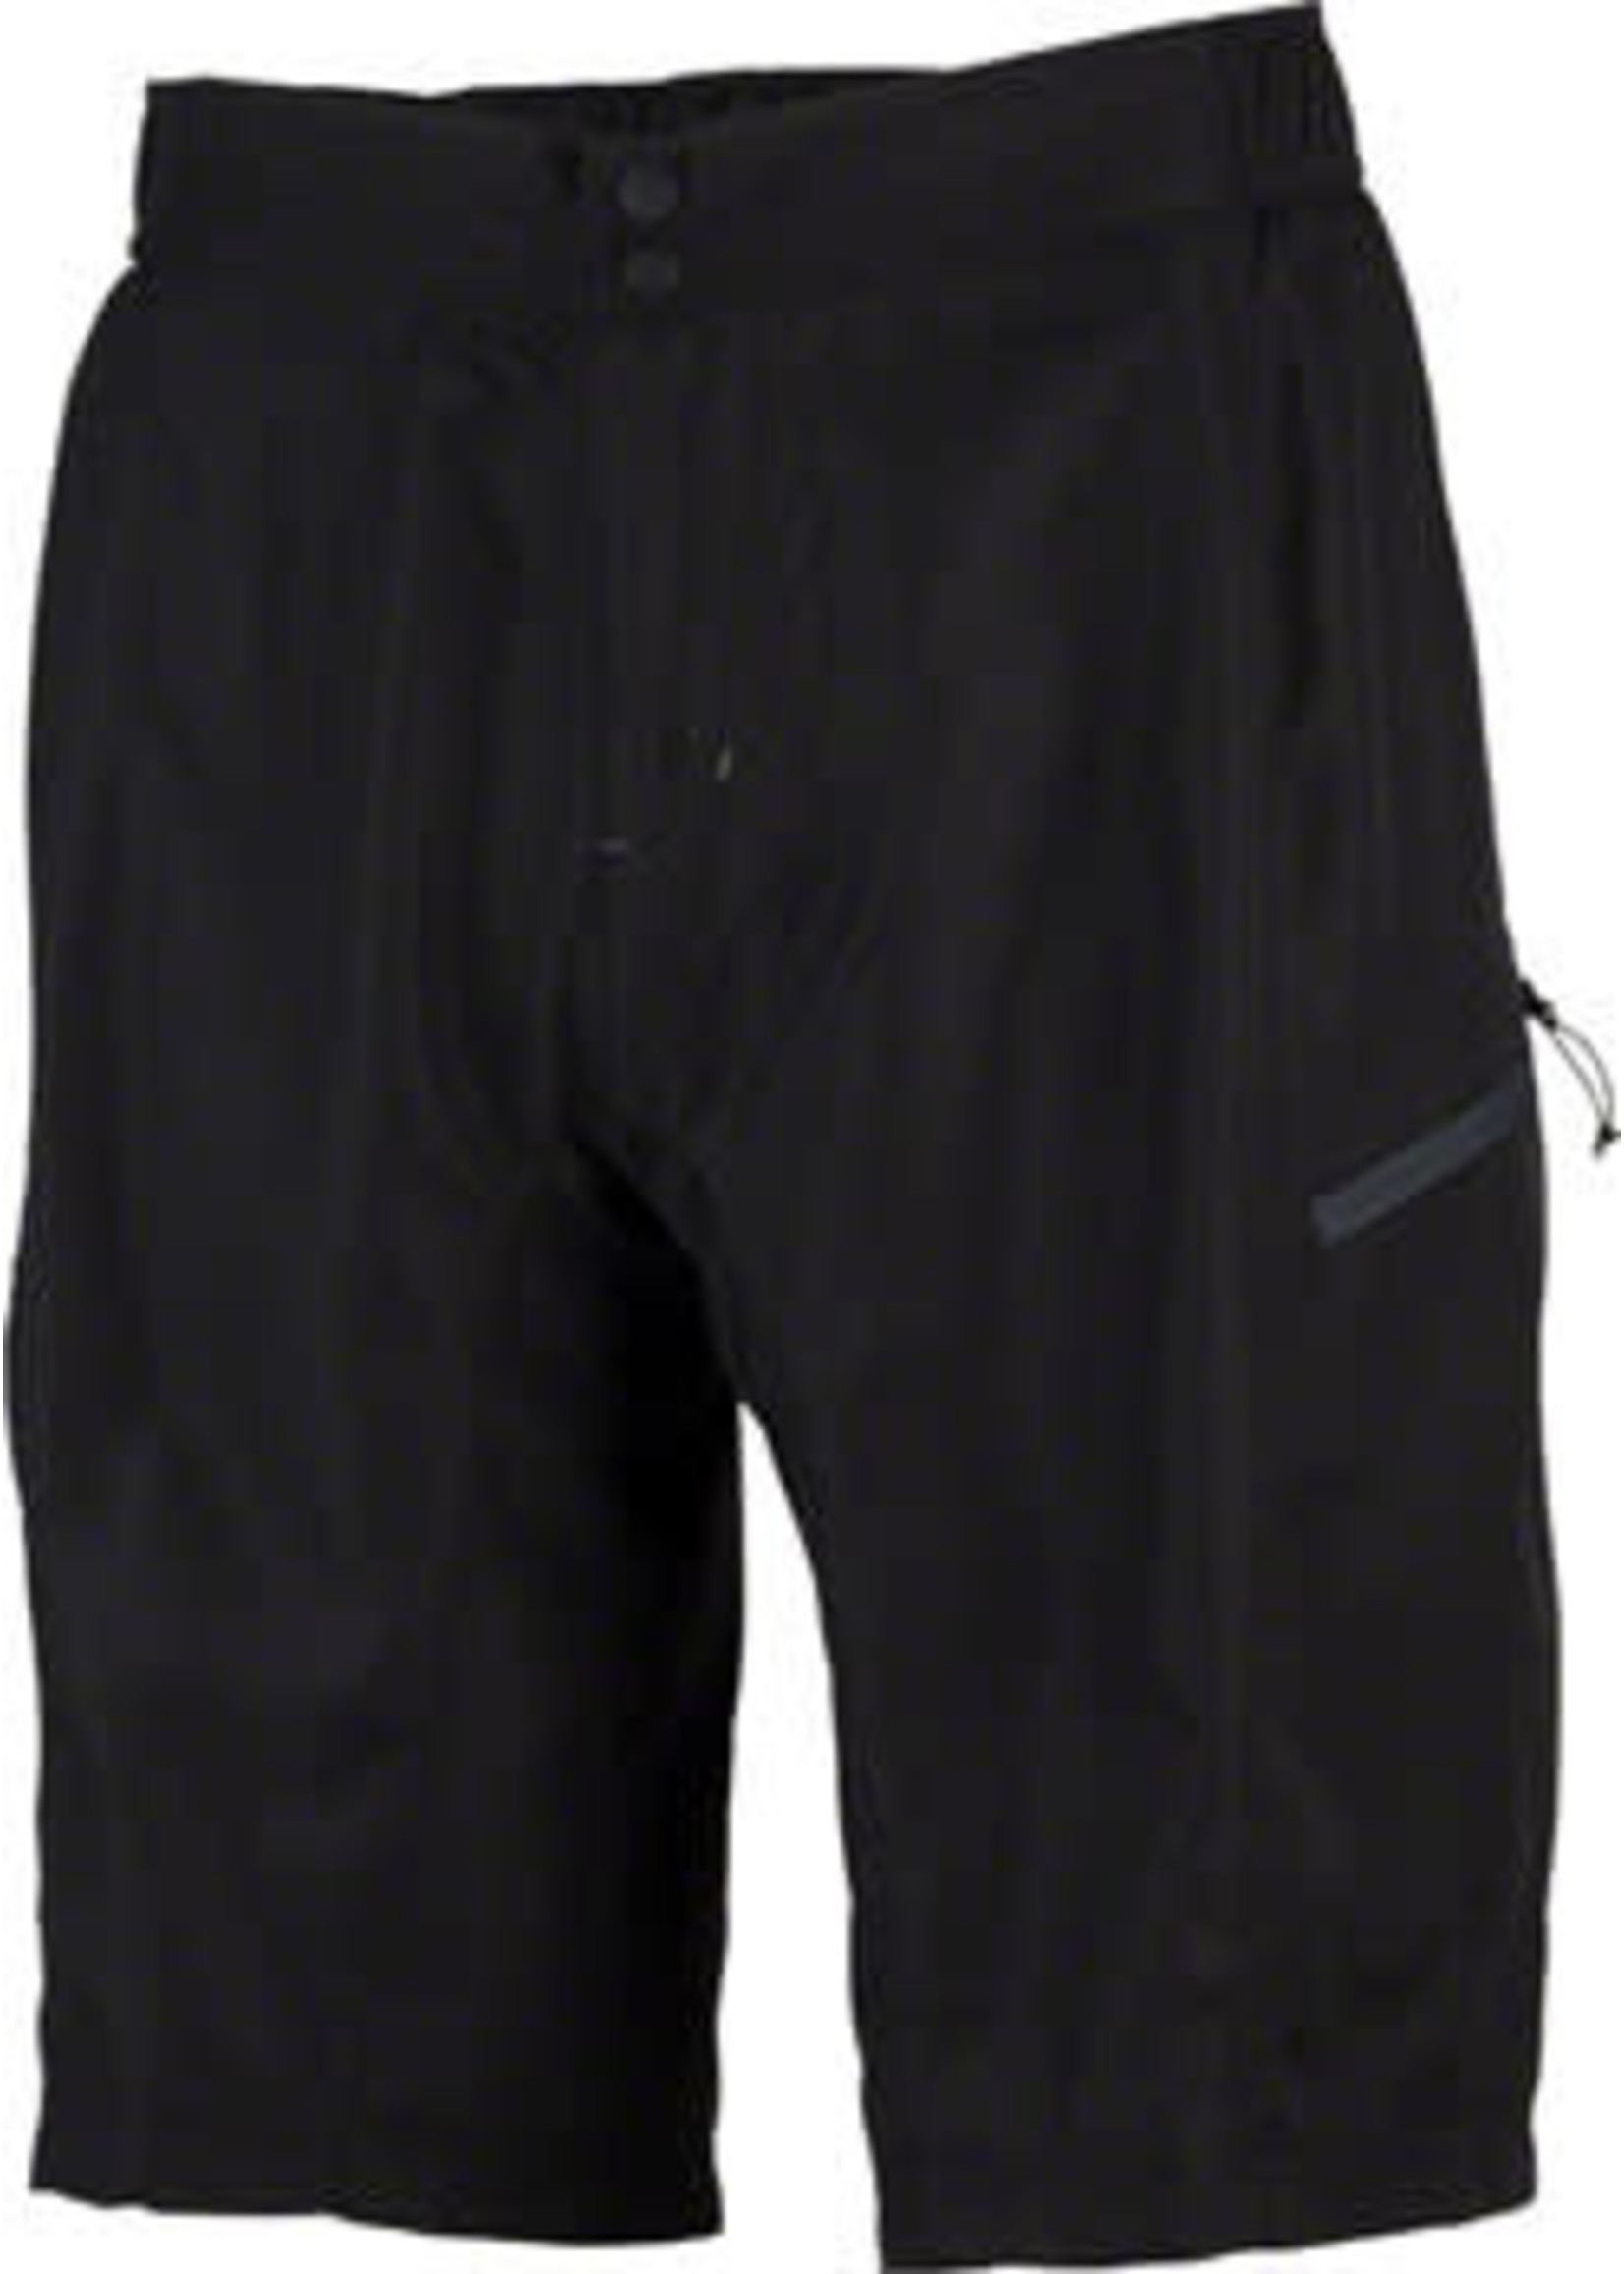 Bellwether Bellwether Alpine Baggies Cycling Shorts - Black Men's 2X-Large